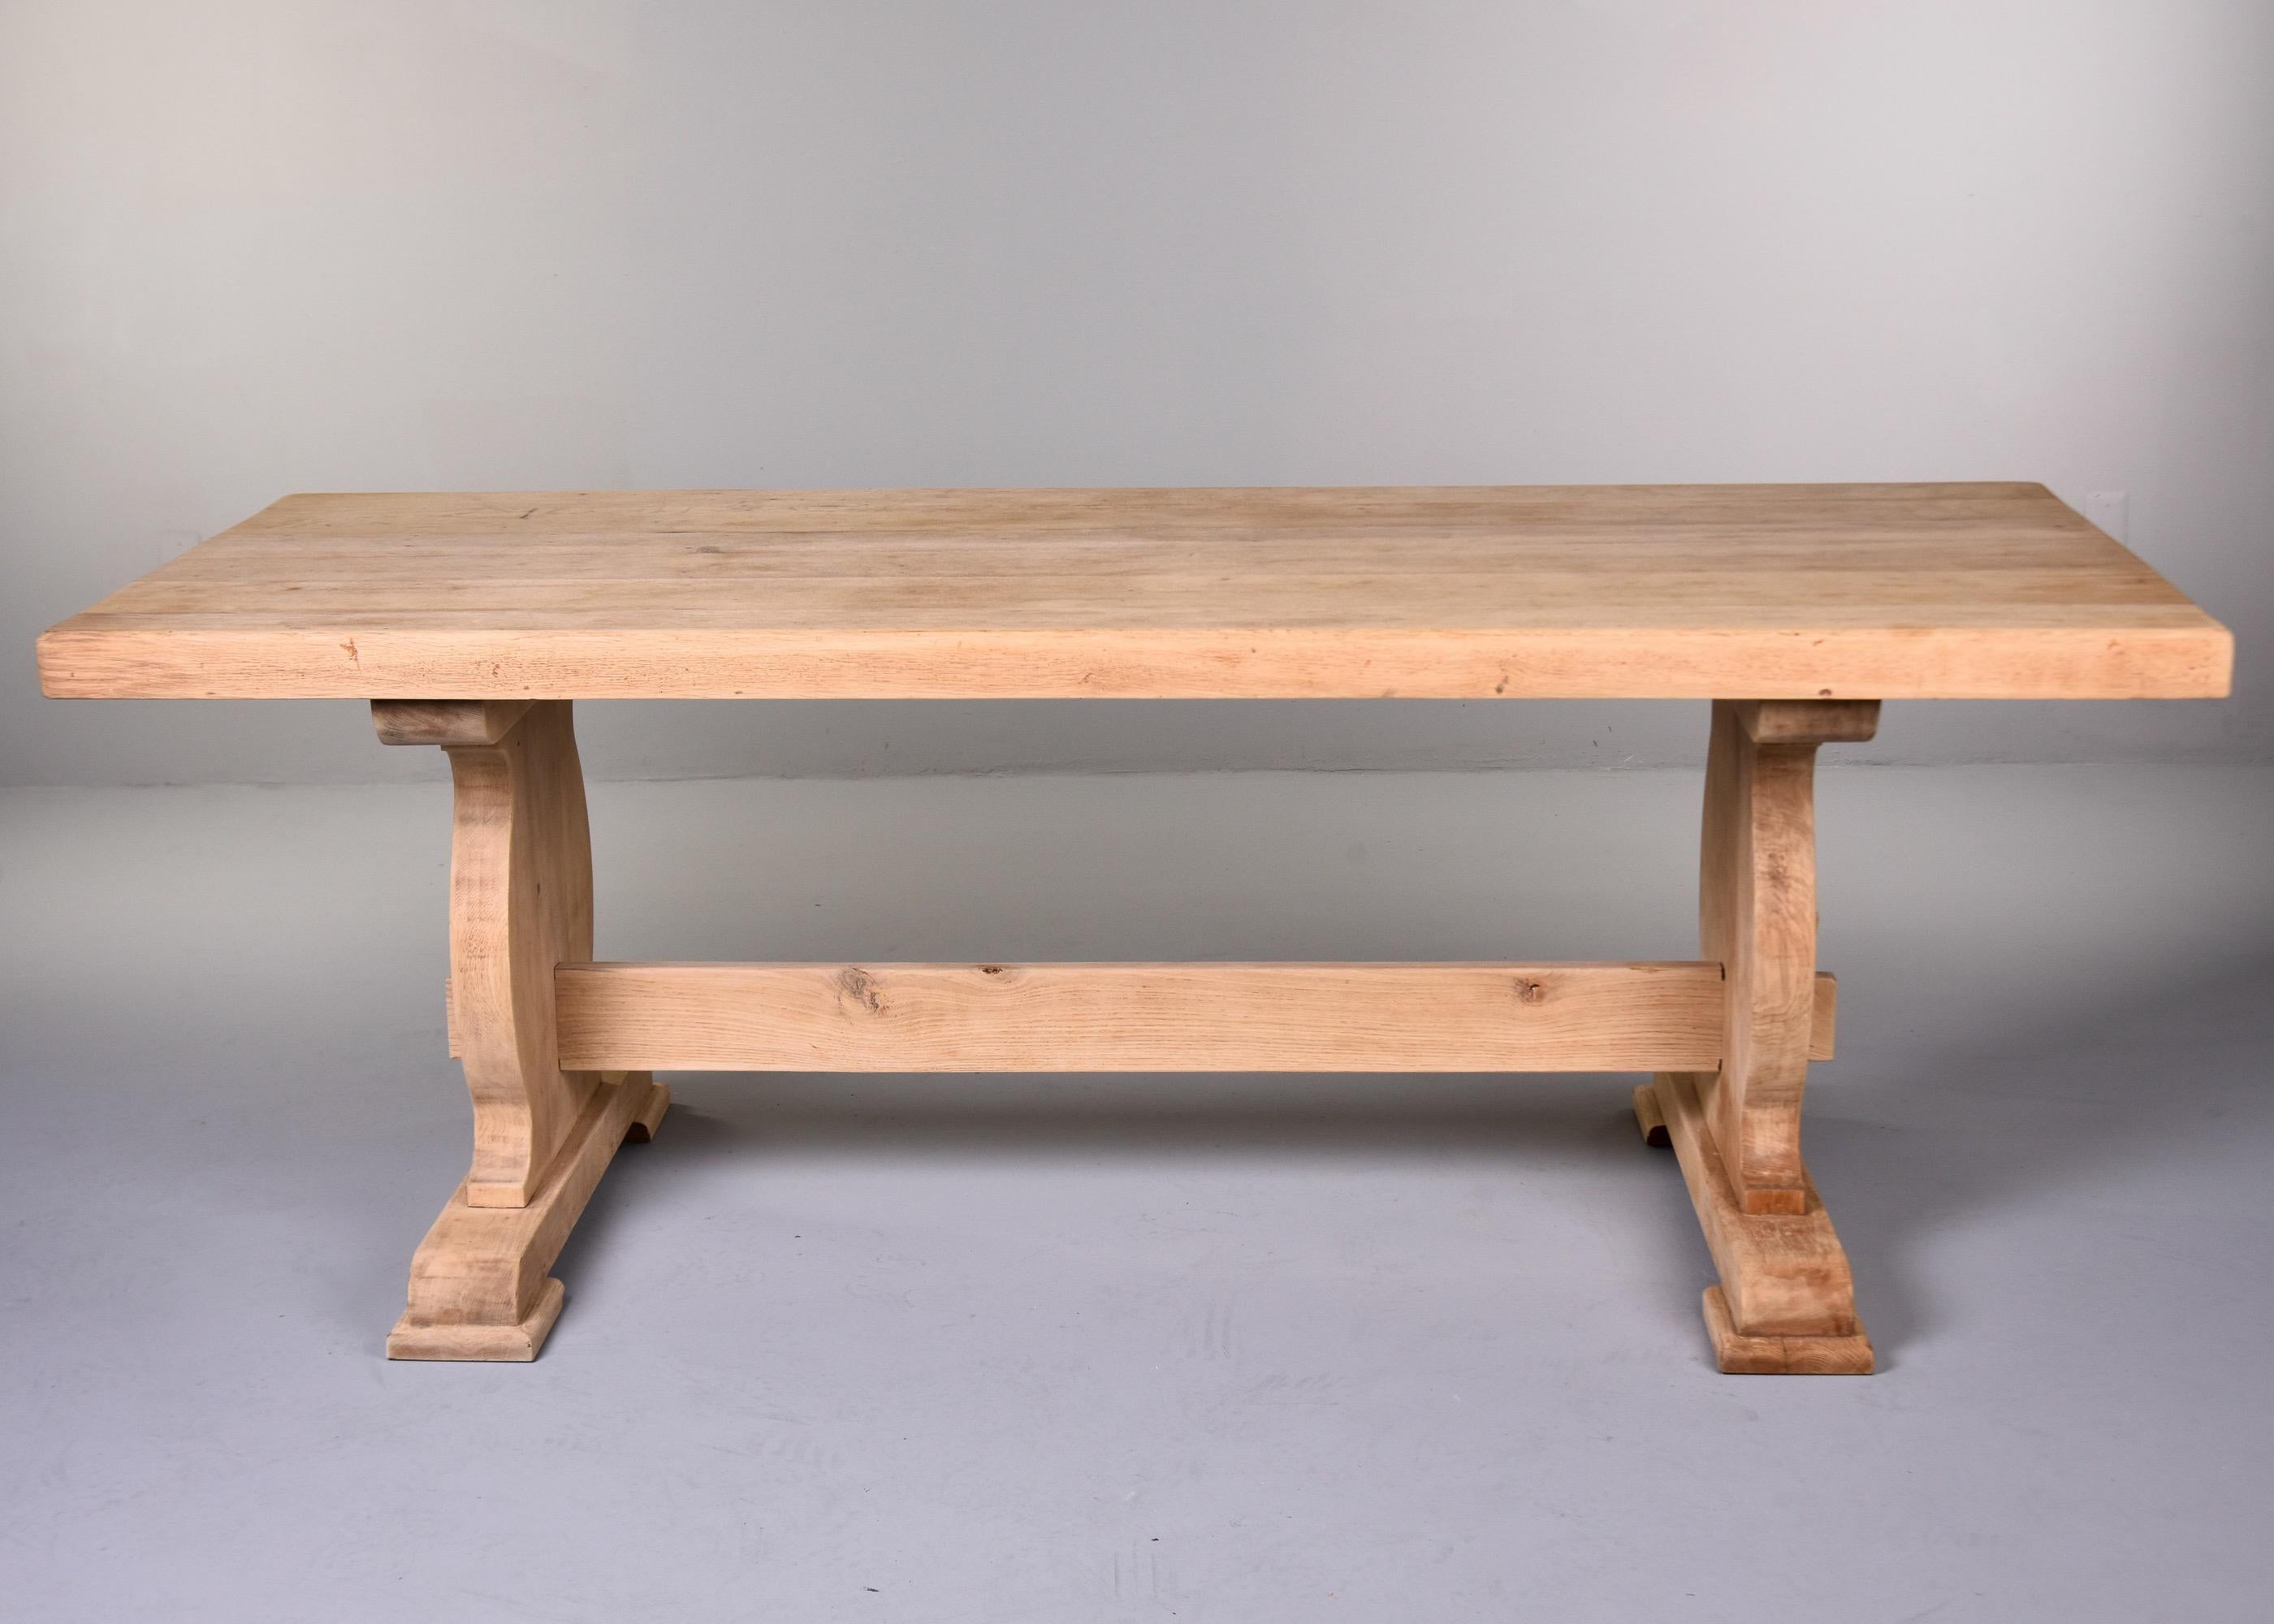 20th Century Circa 1900 Sanded Bare Oak French Country Trestle Table